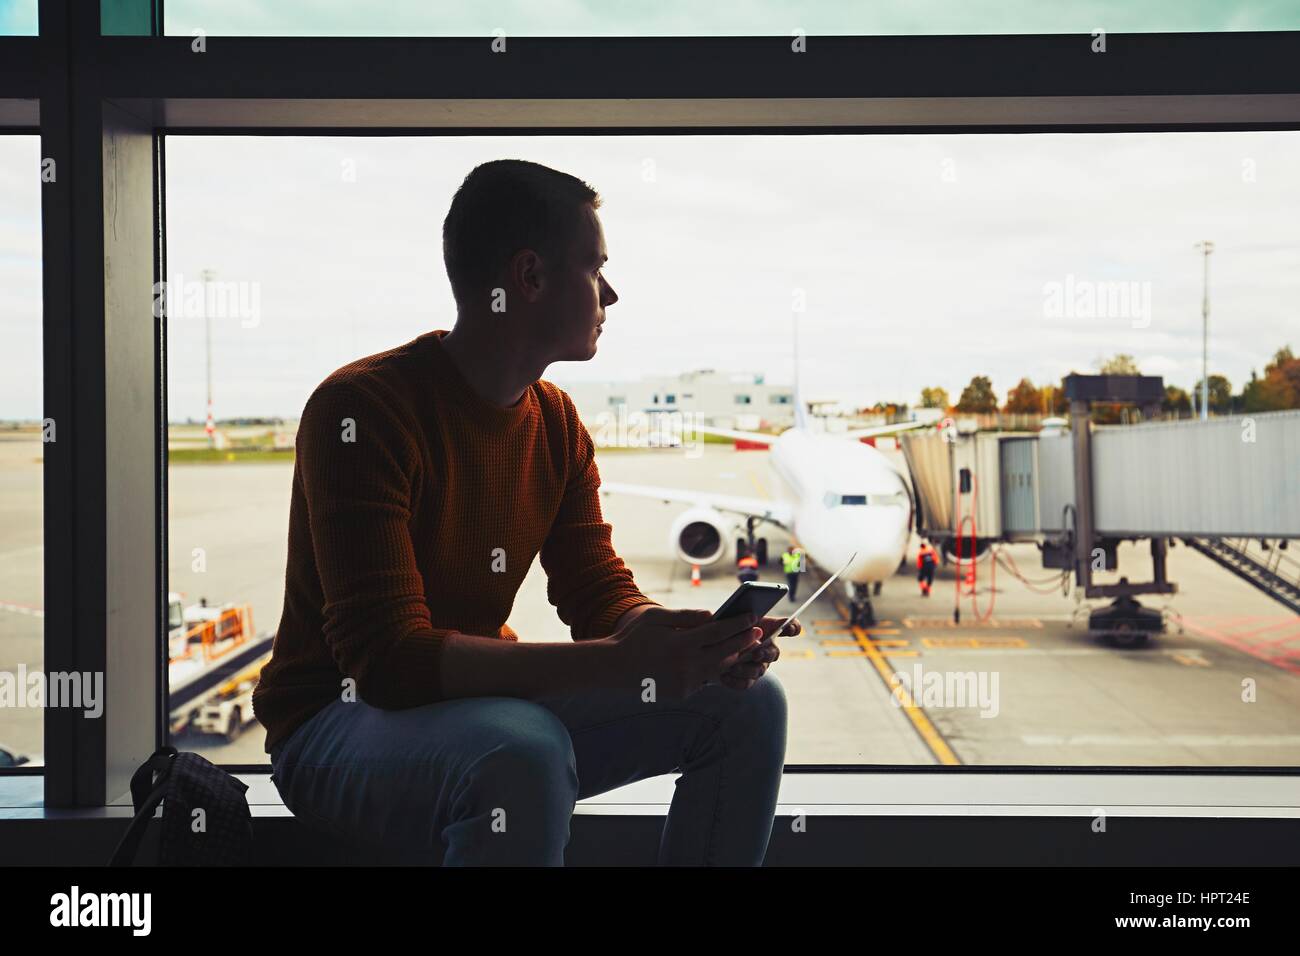 Silhouette of the young man with mobile phone and boarding pass in hand waiting inside airport terminal. The ground crew prepares the plane for the ne Stock Photo